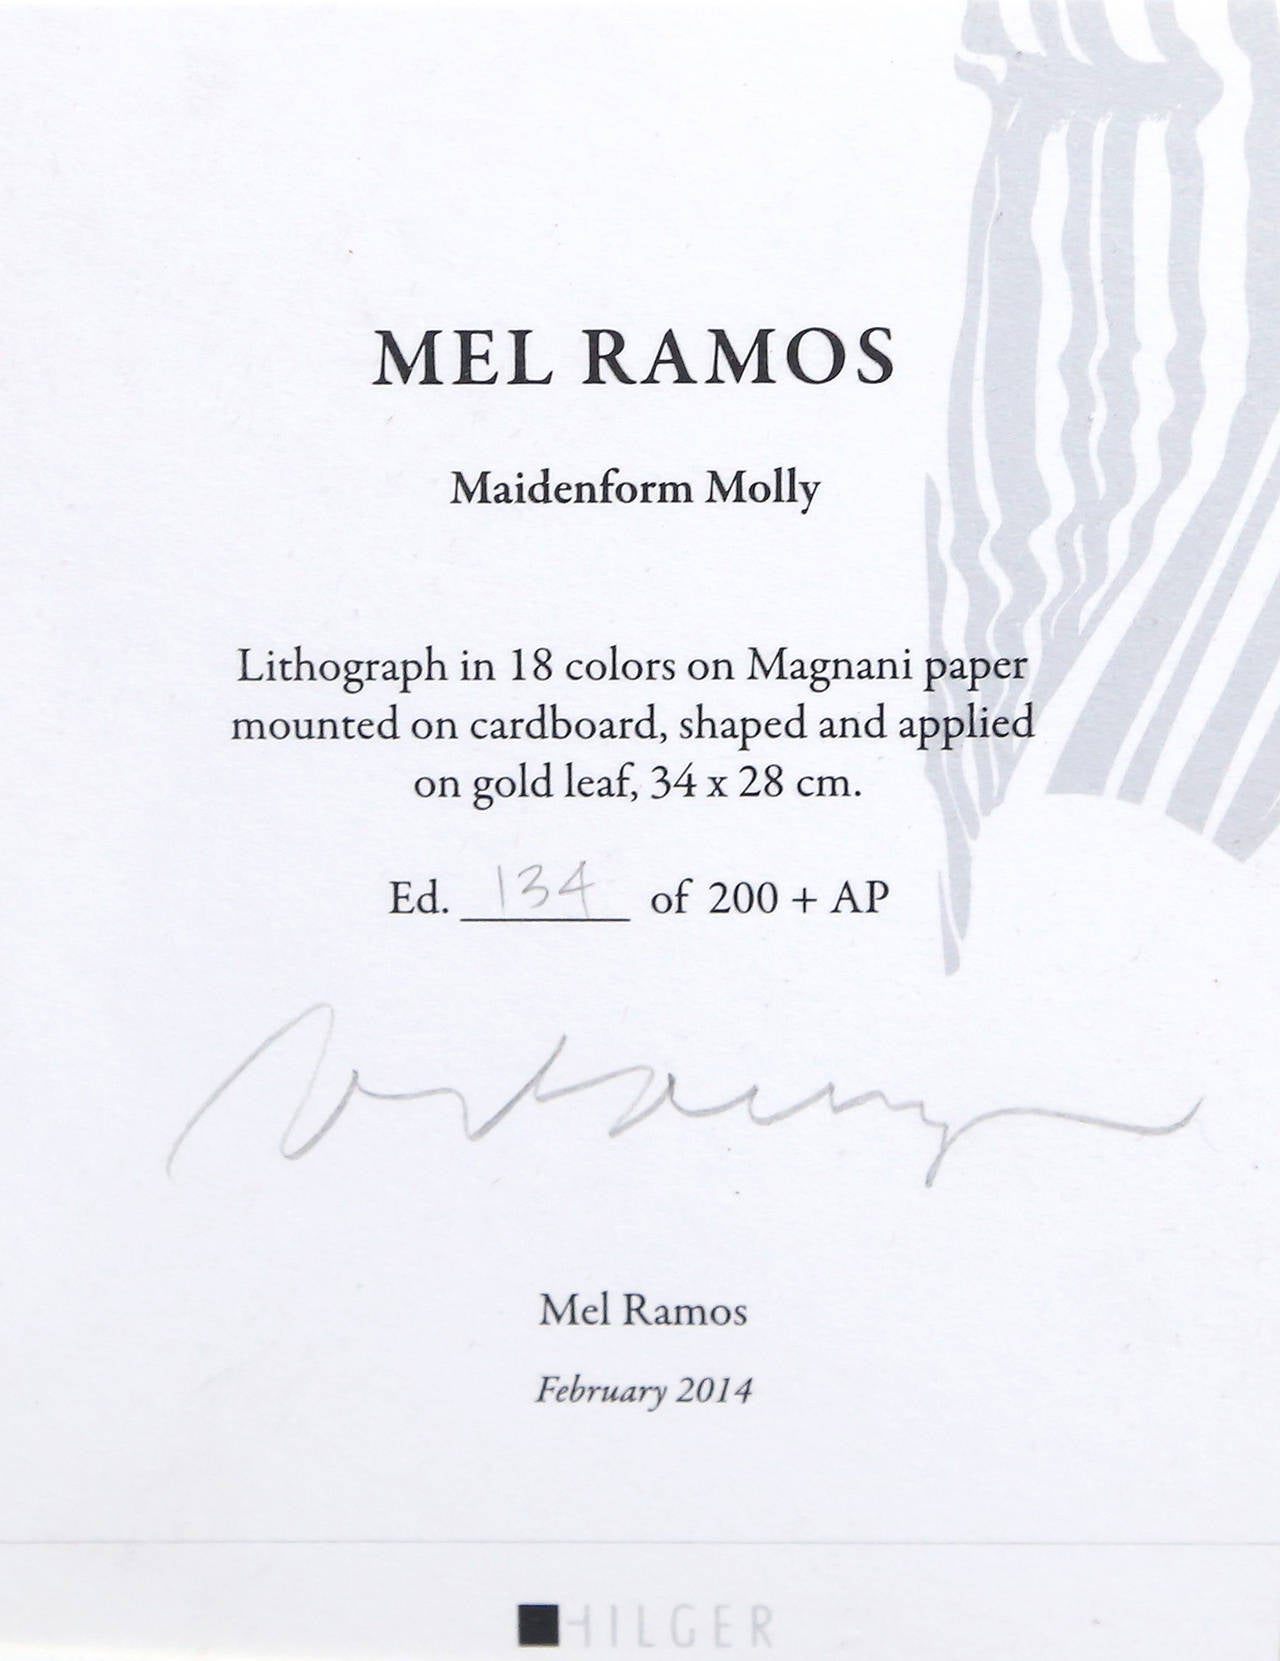 Maidenform Molly, Pop Art Lithograph with Gold Leaf by Mel Ramos For Sale 3